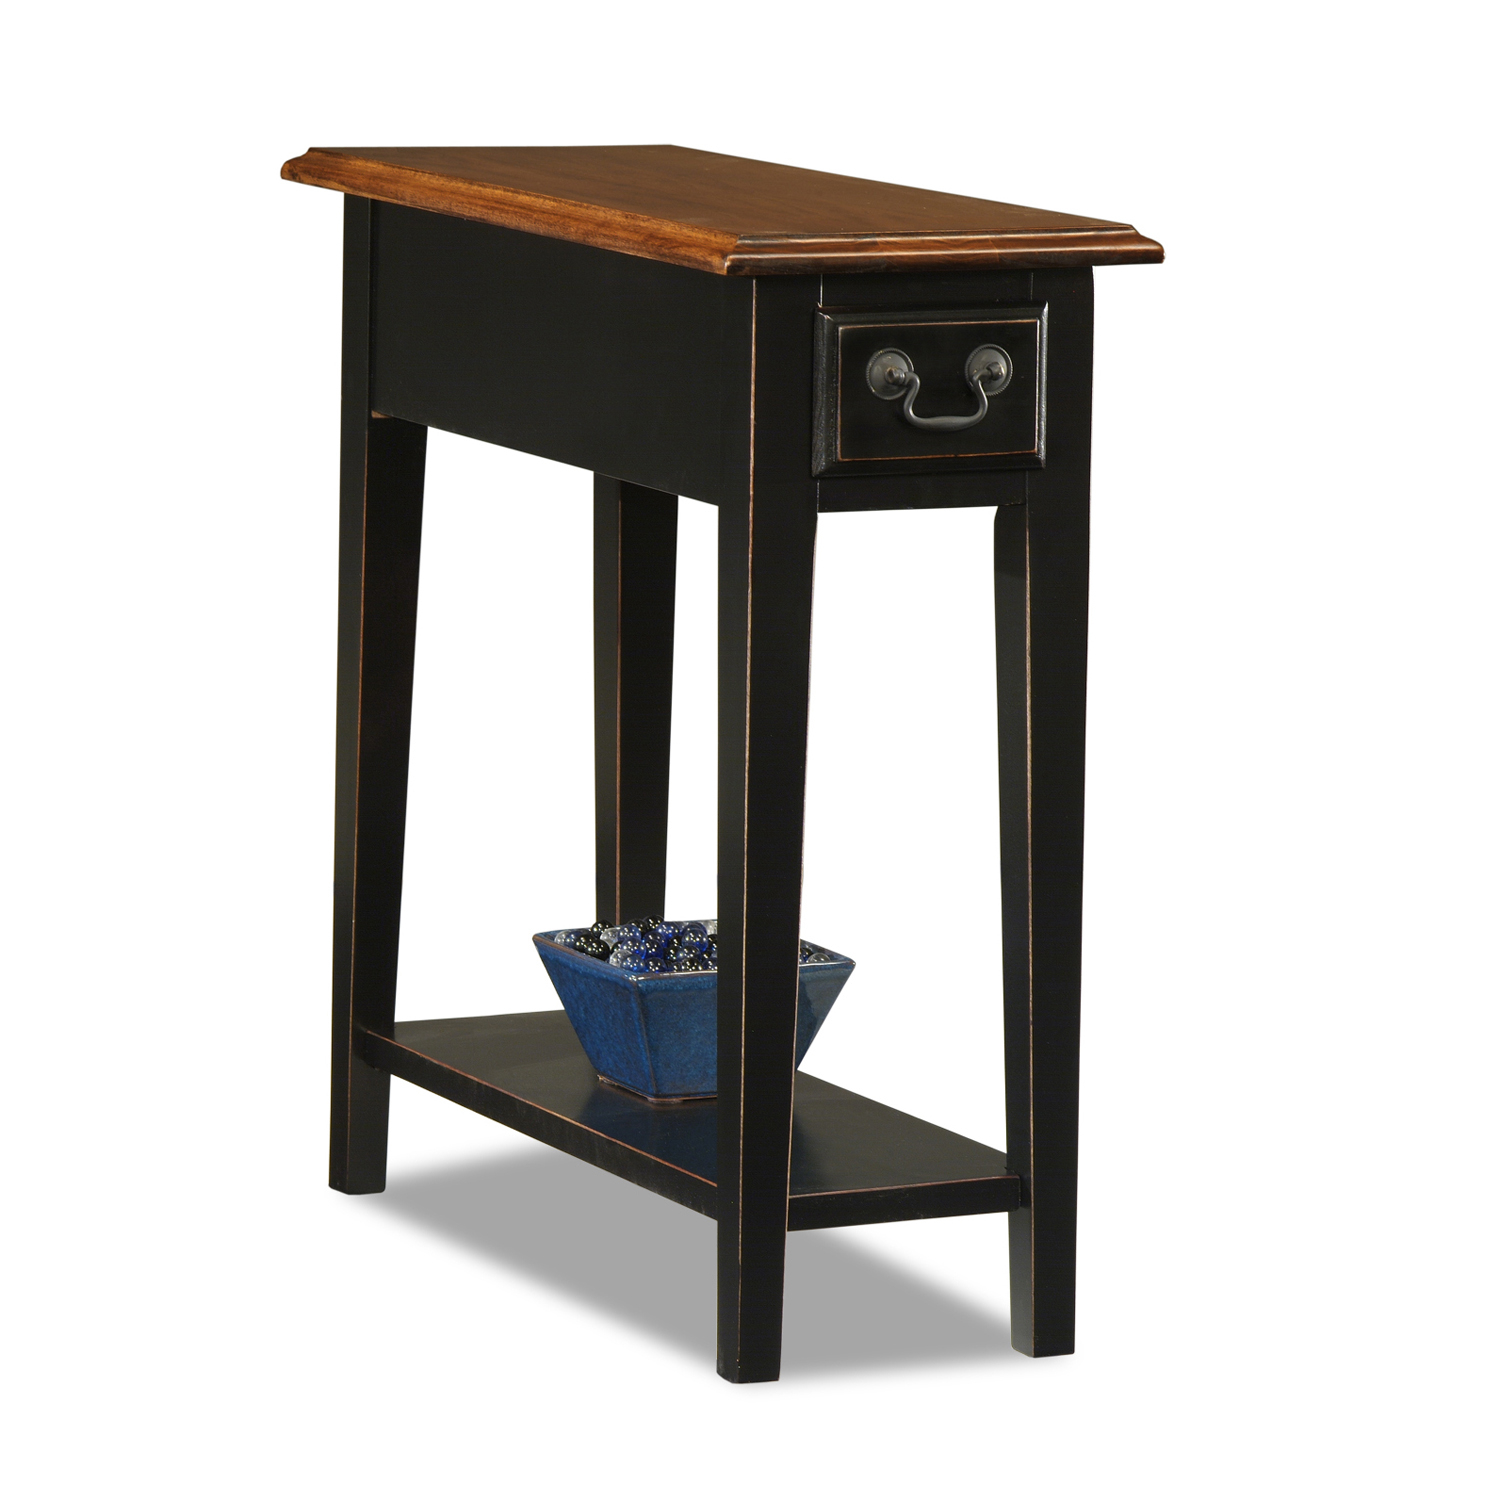 Narrow end table really want this for the downstairs fireplace